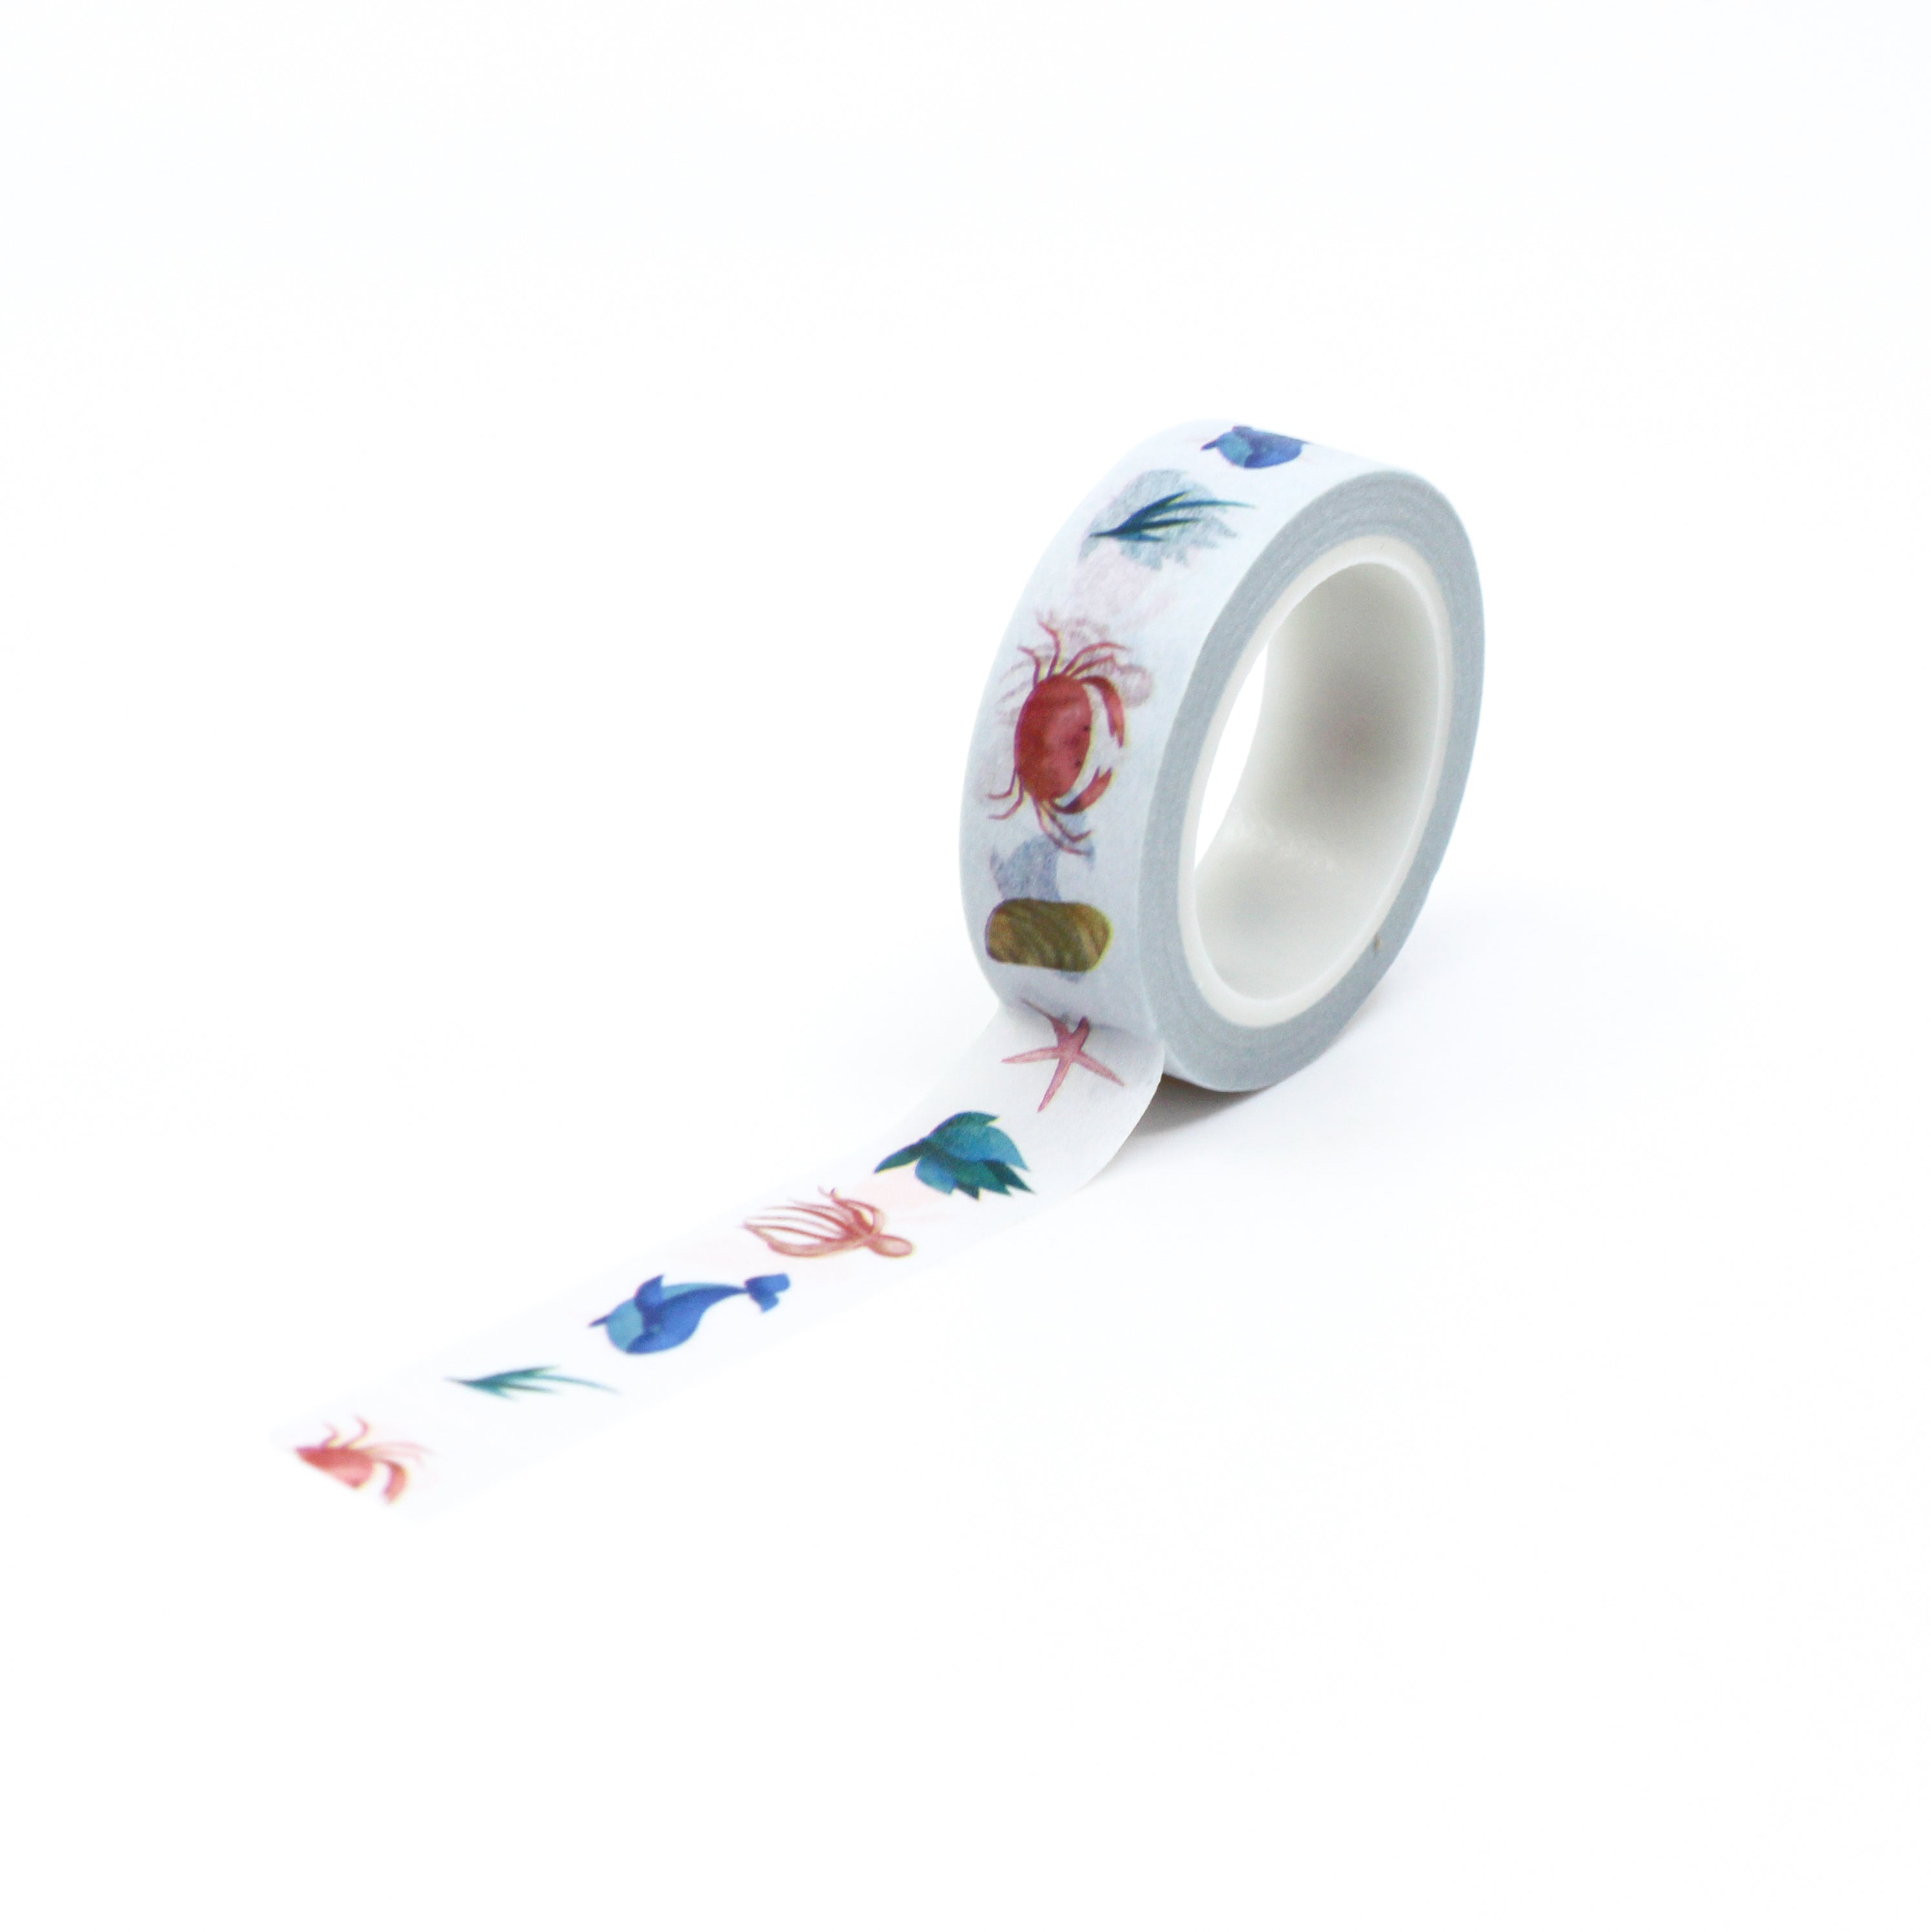 Dive into creativity with our Sea Creatures Washi Tape, adorned with delightful underwater motifs. Ideal for adding an aquatic and playful touch to your projects. This tape is sold at BBB Supplies Craft Shop.